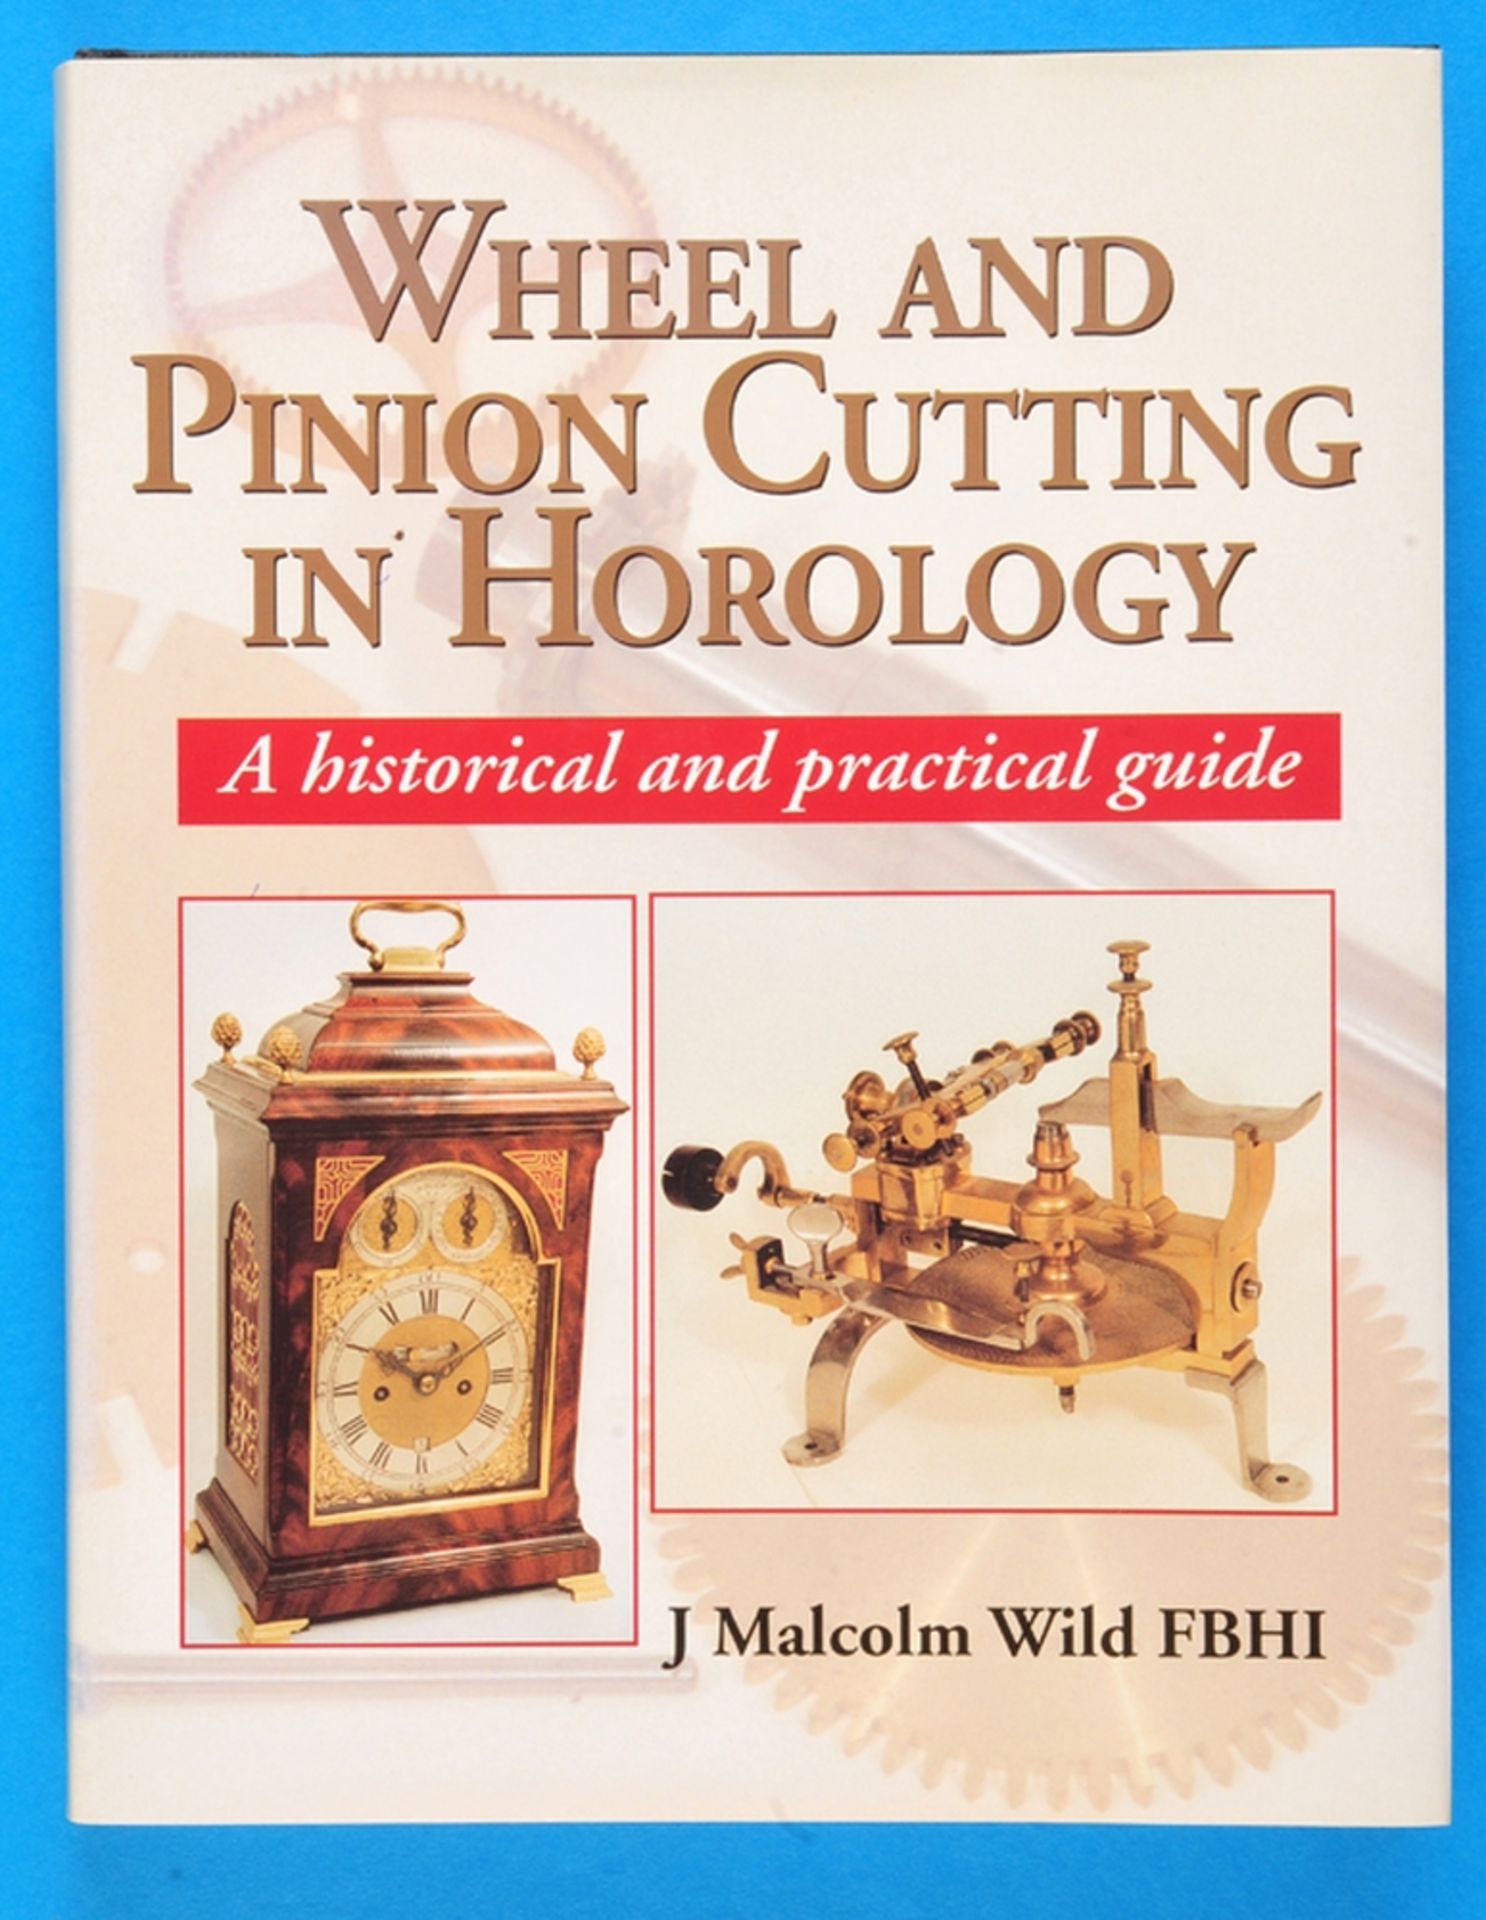 J. Malcolm Wild, Wheel and Pinion Cutting in Horology, A historical and practical guide